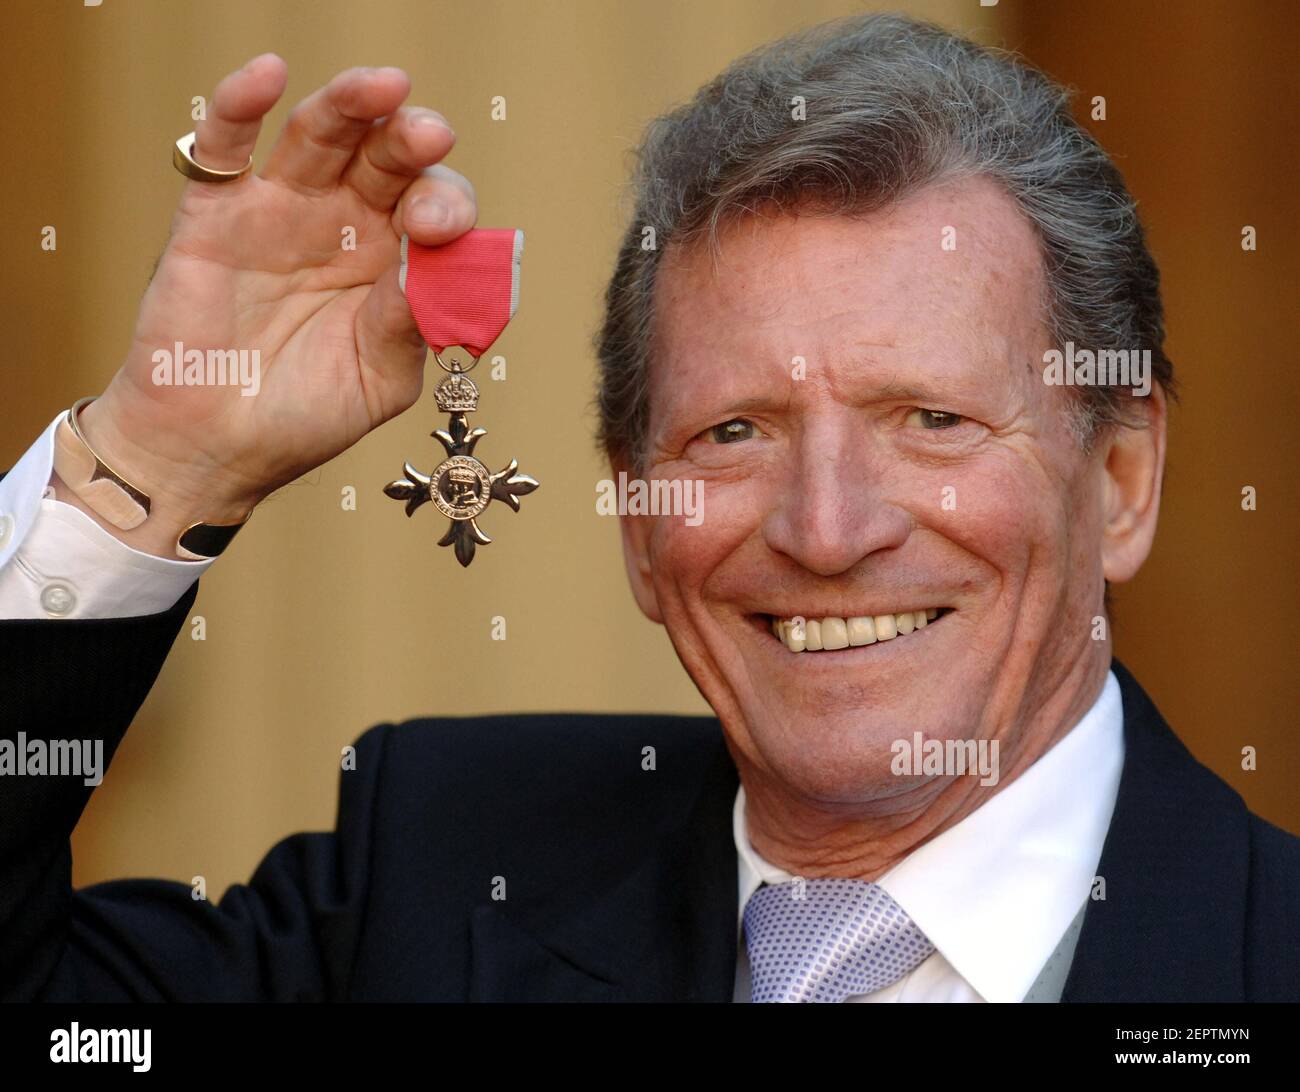 File photo dated 07/03/2007 of Johnny Briggs, after collecting an MBE from Queen Elizabeth II at Buckingham Palace. The actor who played Mike Baldwin in Coronation Street, died on Sunday aged 85 after a long illness, his family said. Stock Photo